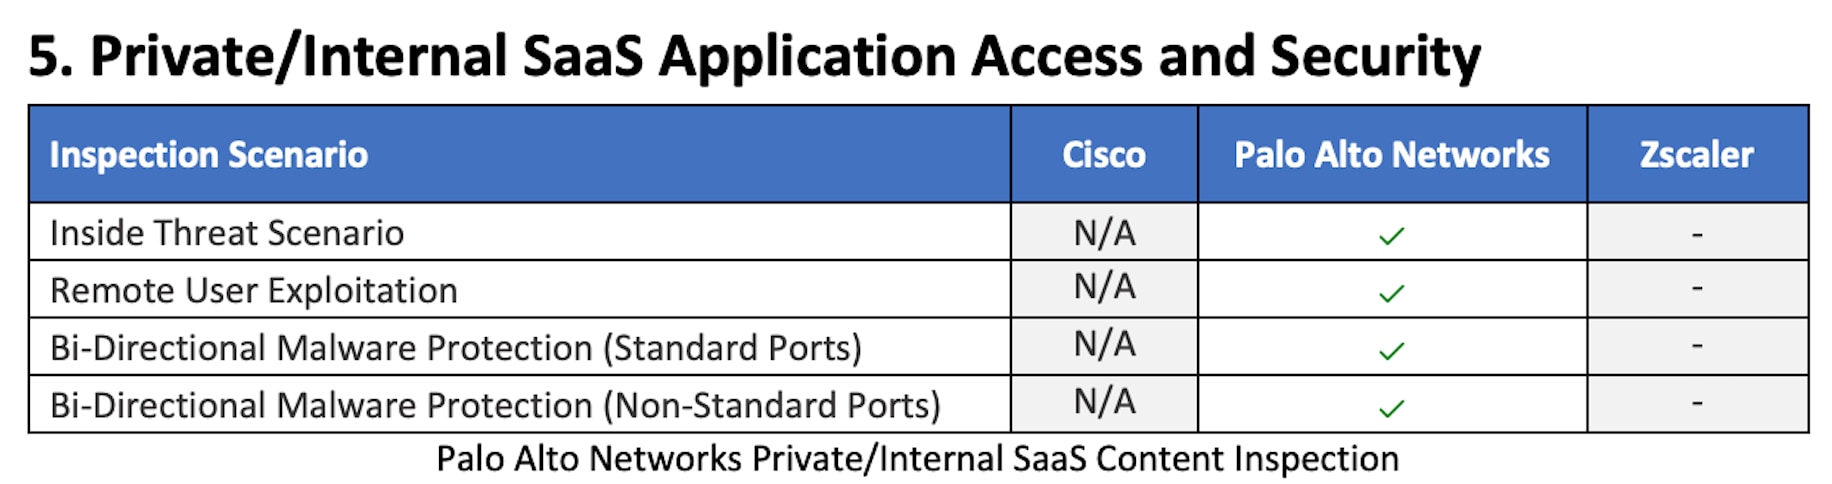 Private/Internal SaaS Application Access and Security